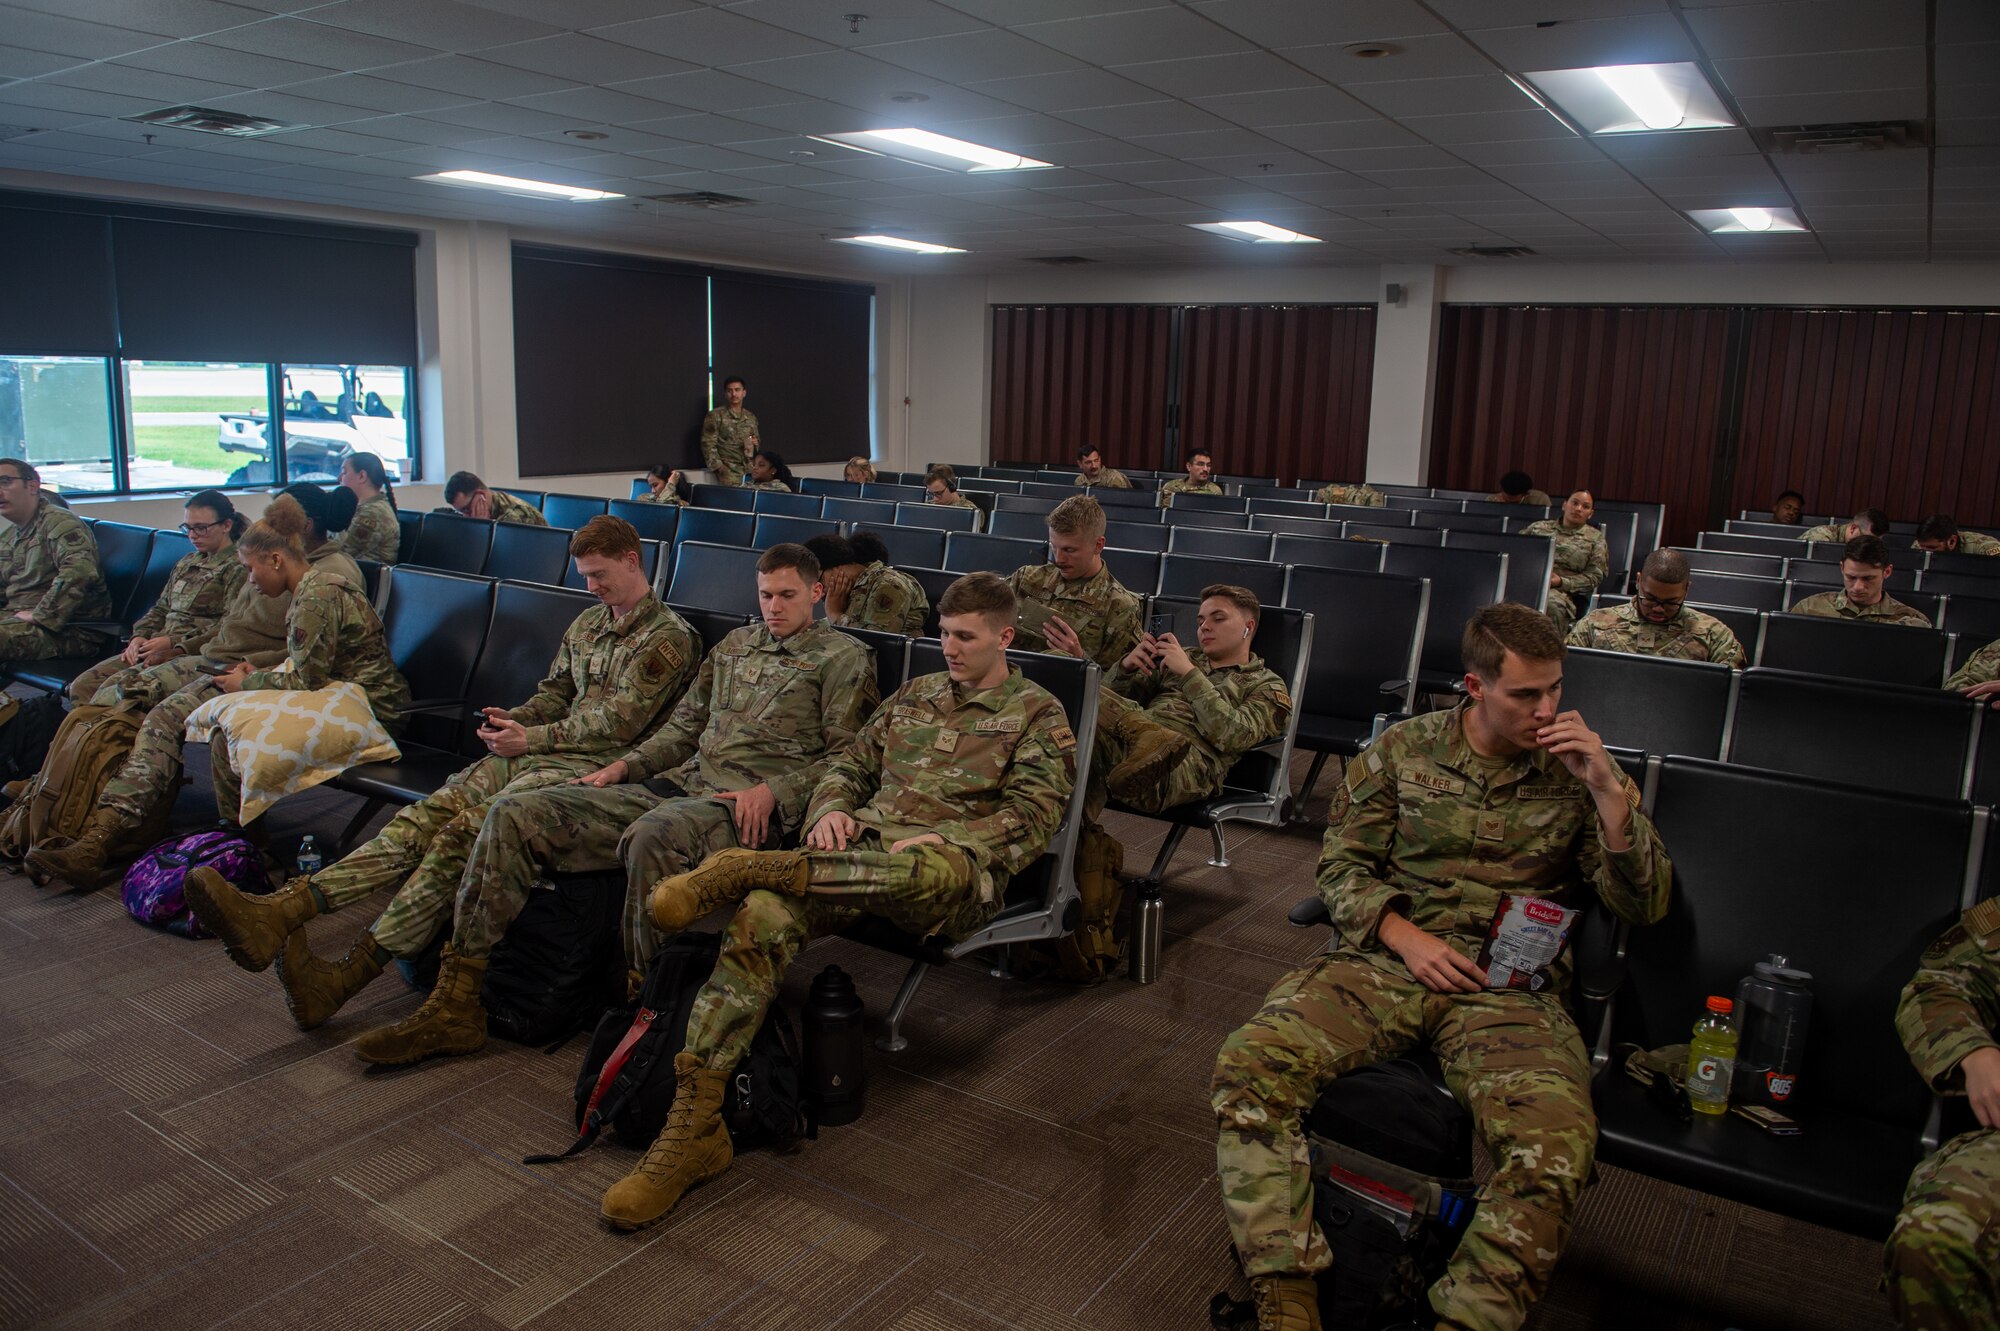 U.S. Air Force Airmen socialize in the Deployment Control Center’s waiting area in preparation for an upcoming flight during Exercise Ready Tiger 24-1 at Moody Air Force Base, Georgia, April 8, 2024. Built upon Air Combat Command's directive to assert air power in contested environments, Exercise Ready Tiger 24-1 aims to test and enhance the 23rd Wing’s proficiency in executing Lead Wing and Expeditionary Air Base concepts through Agile Combat Employment and command and control operations. (U.S. Air Force photo by Airman 1st Class Iain Stanley)